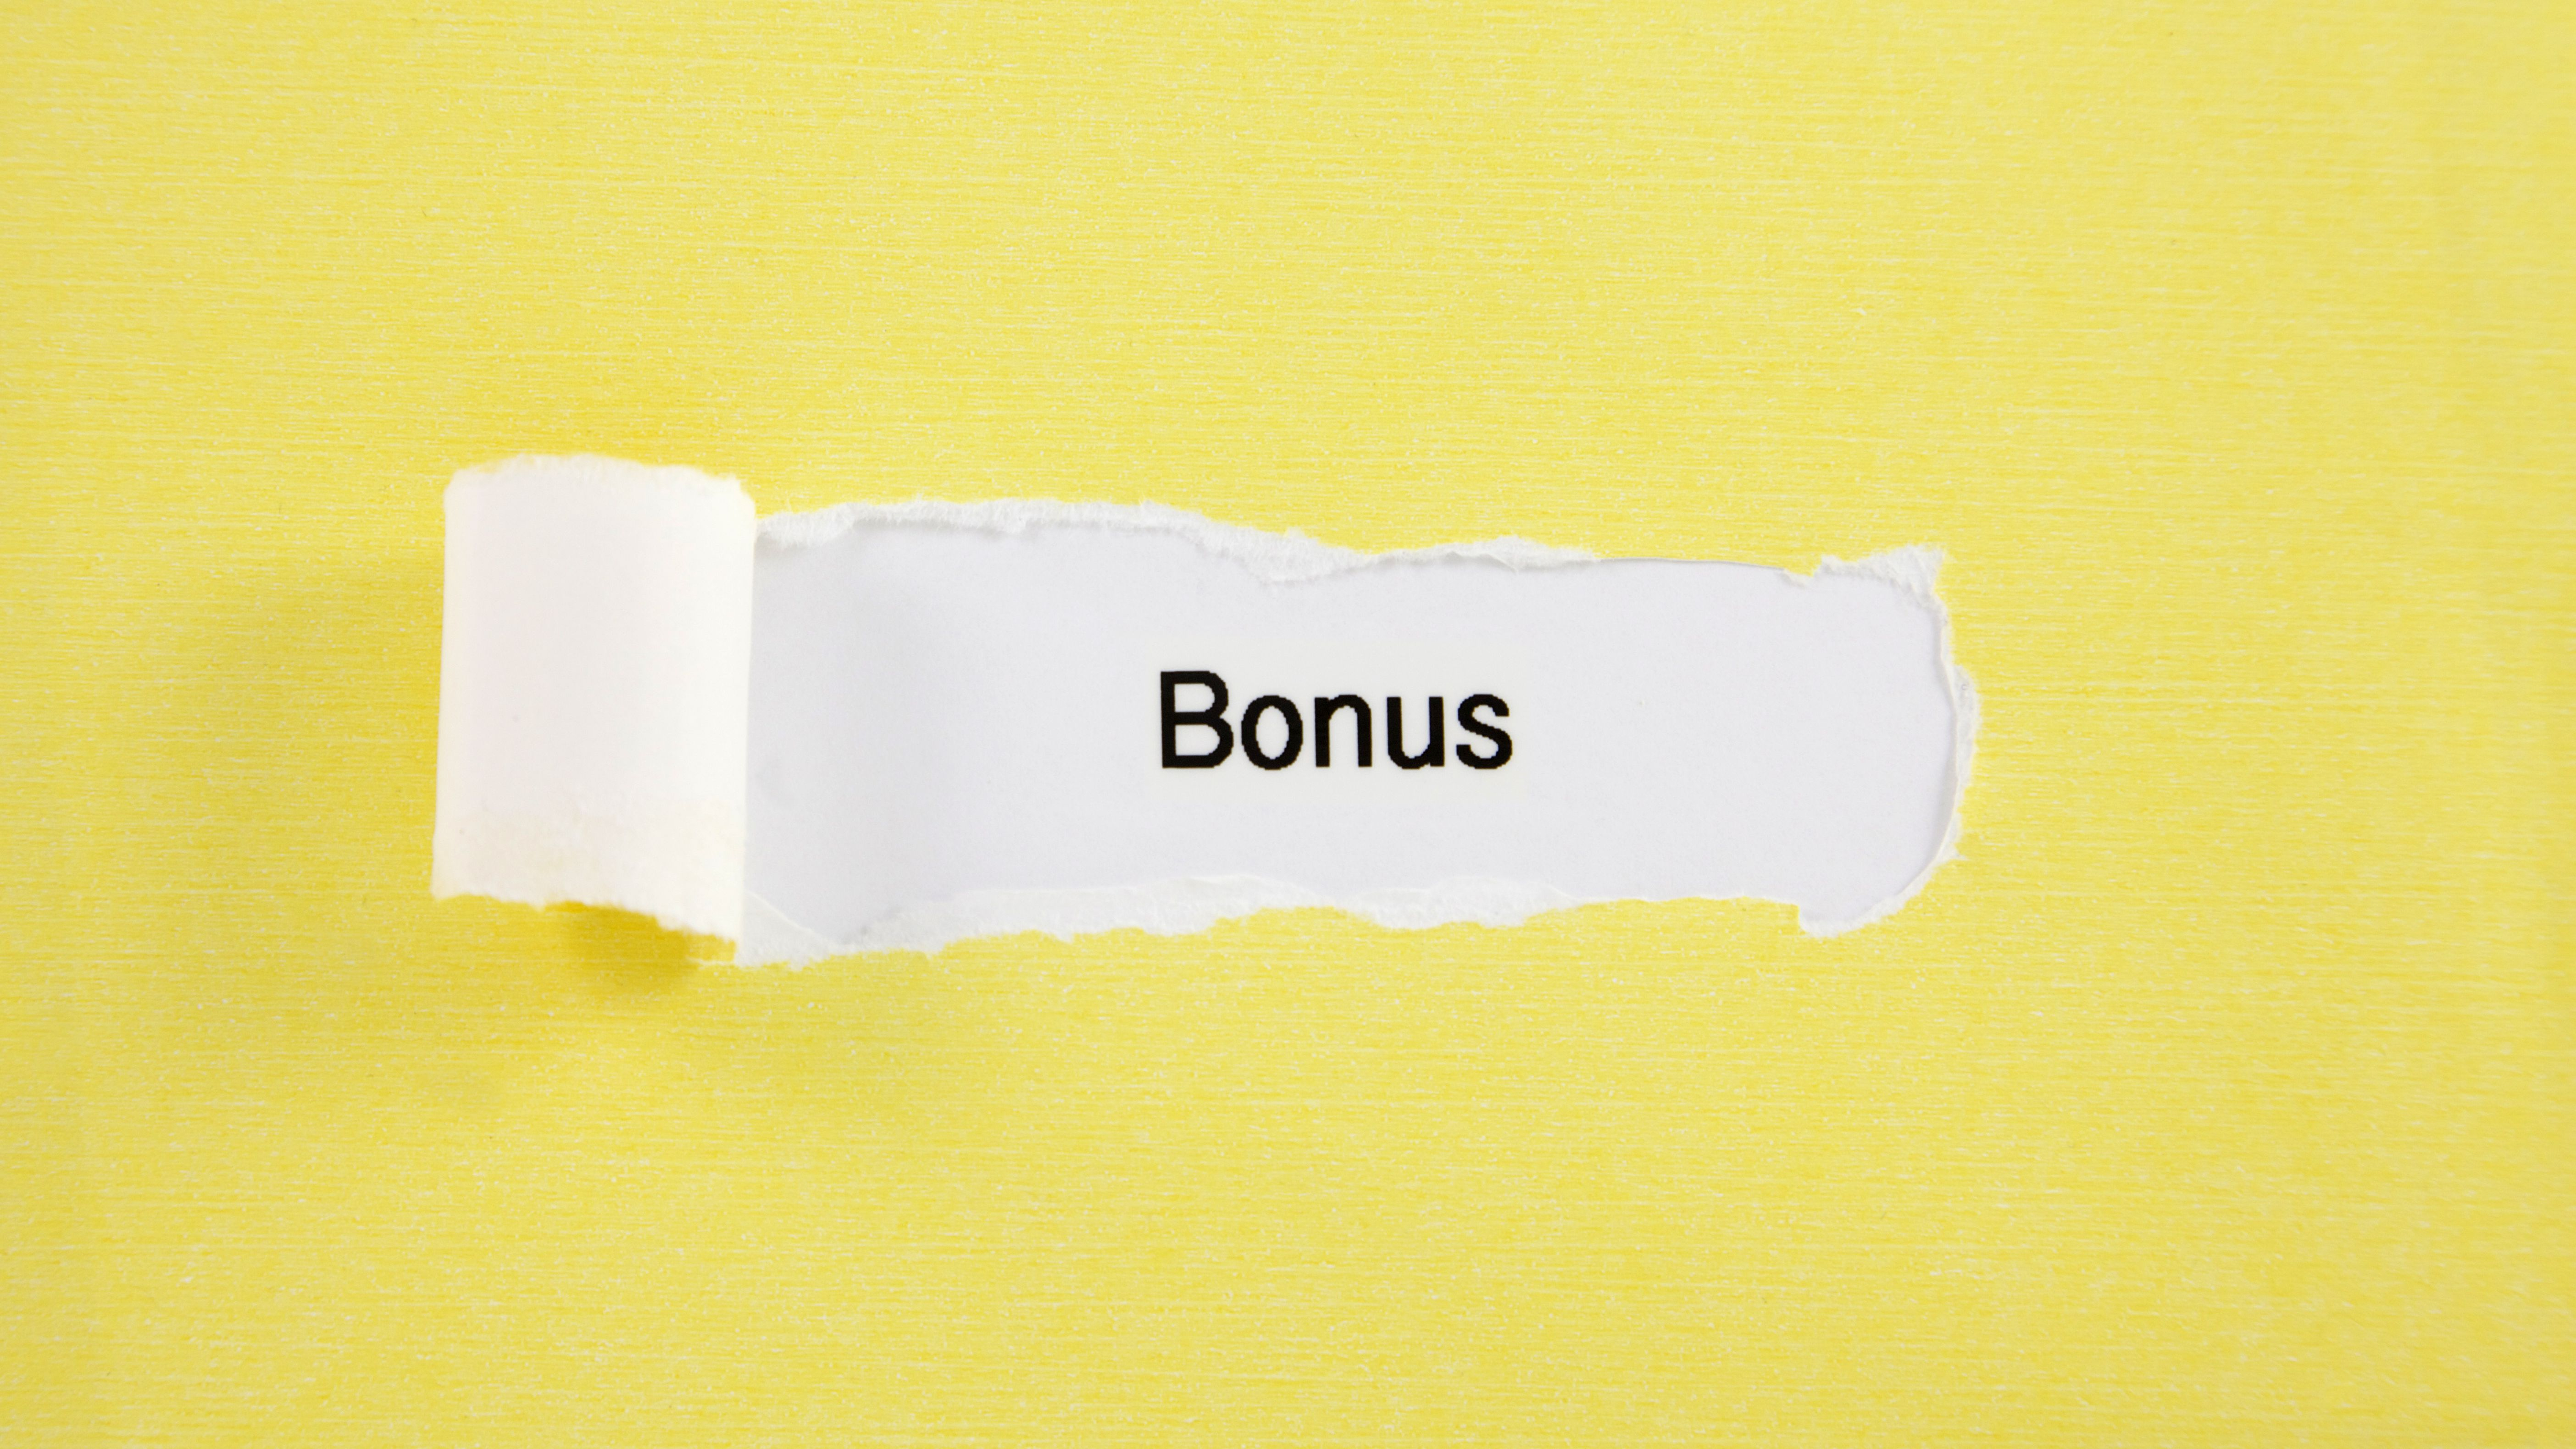 Performance Bonus Agreement What Is A Bonus And Why Might An Employer Provide One